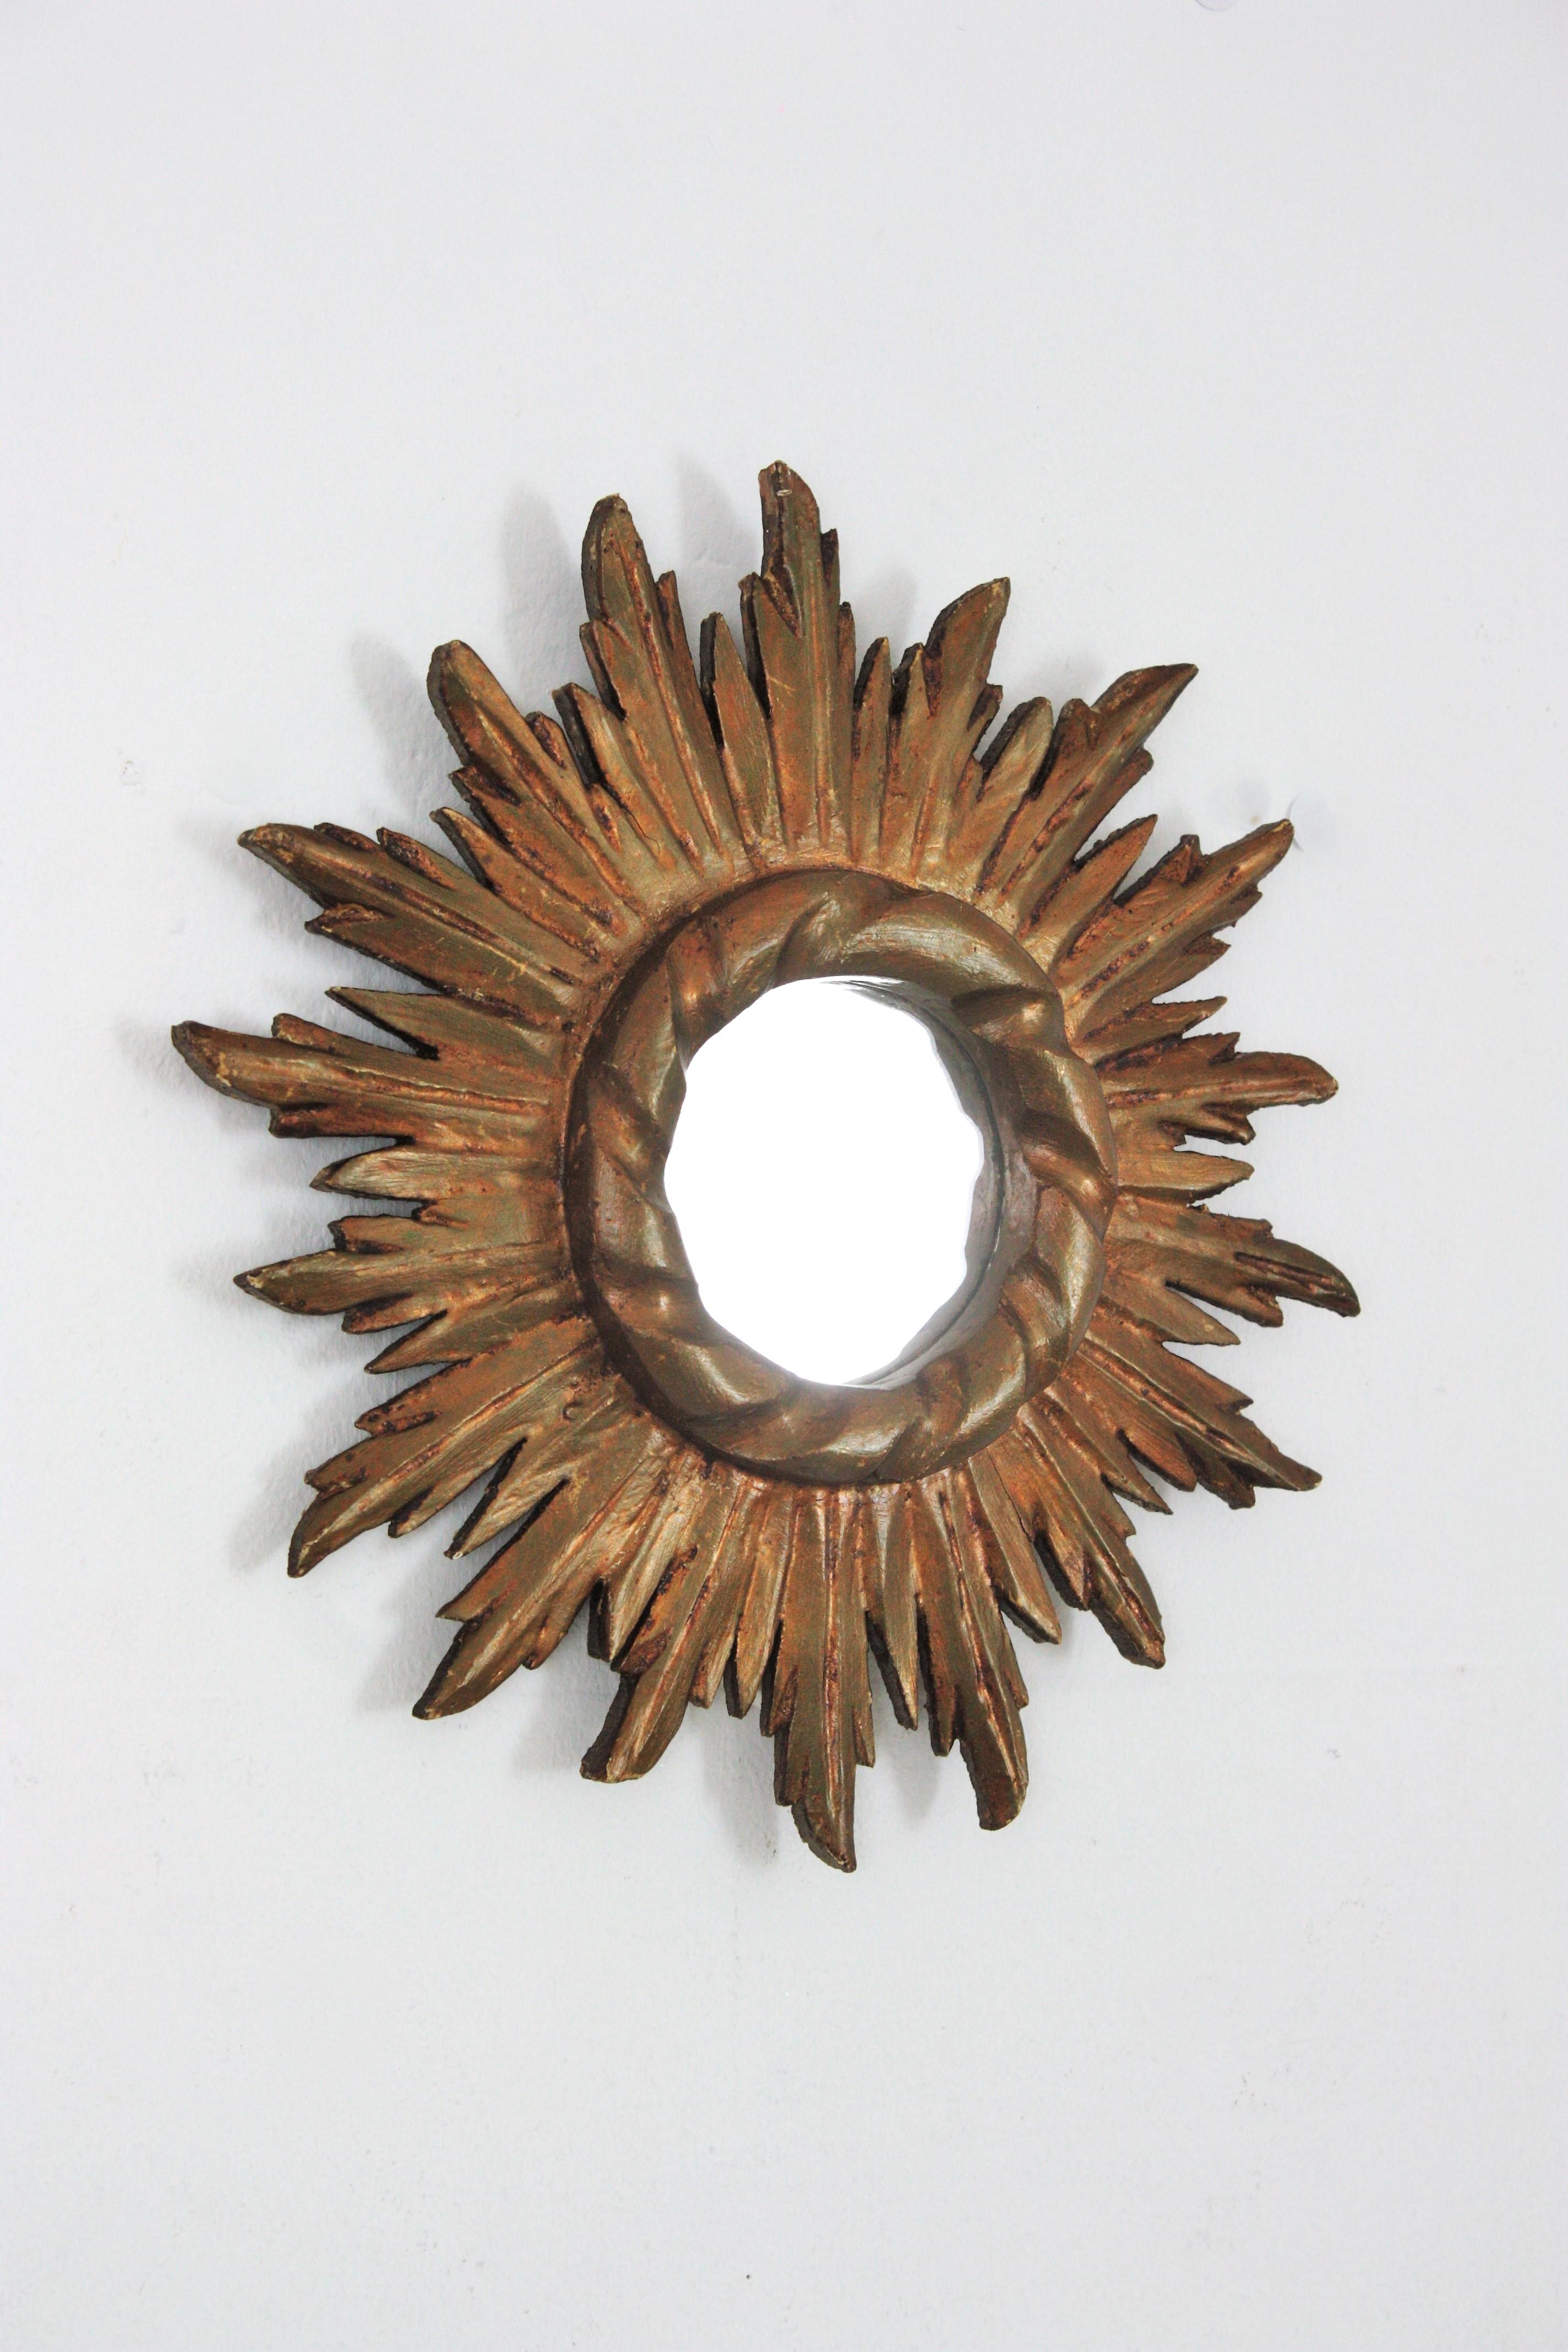 Small sized carved giltwood convex sunburst mirror, Spain,  1950s
This carved giltwood sunburst mirror has a frame has a terrific patina showing it original gold leaf gilding in dark bronze gilding tone.
Place it alone or as a part of a sunburst